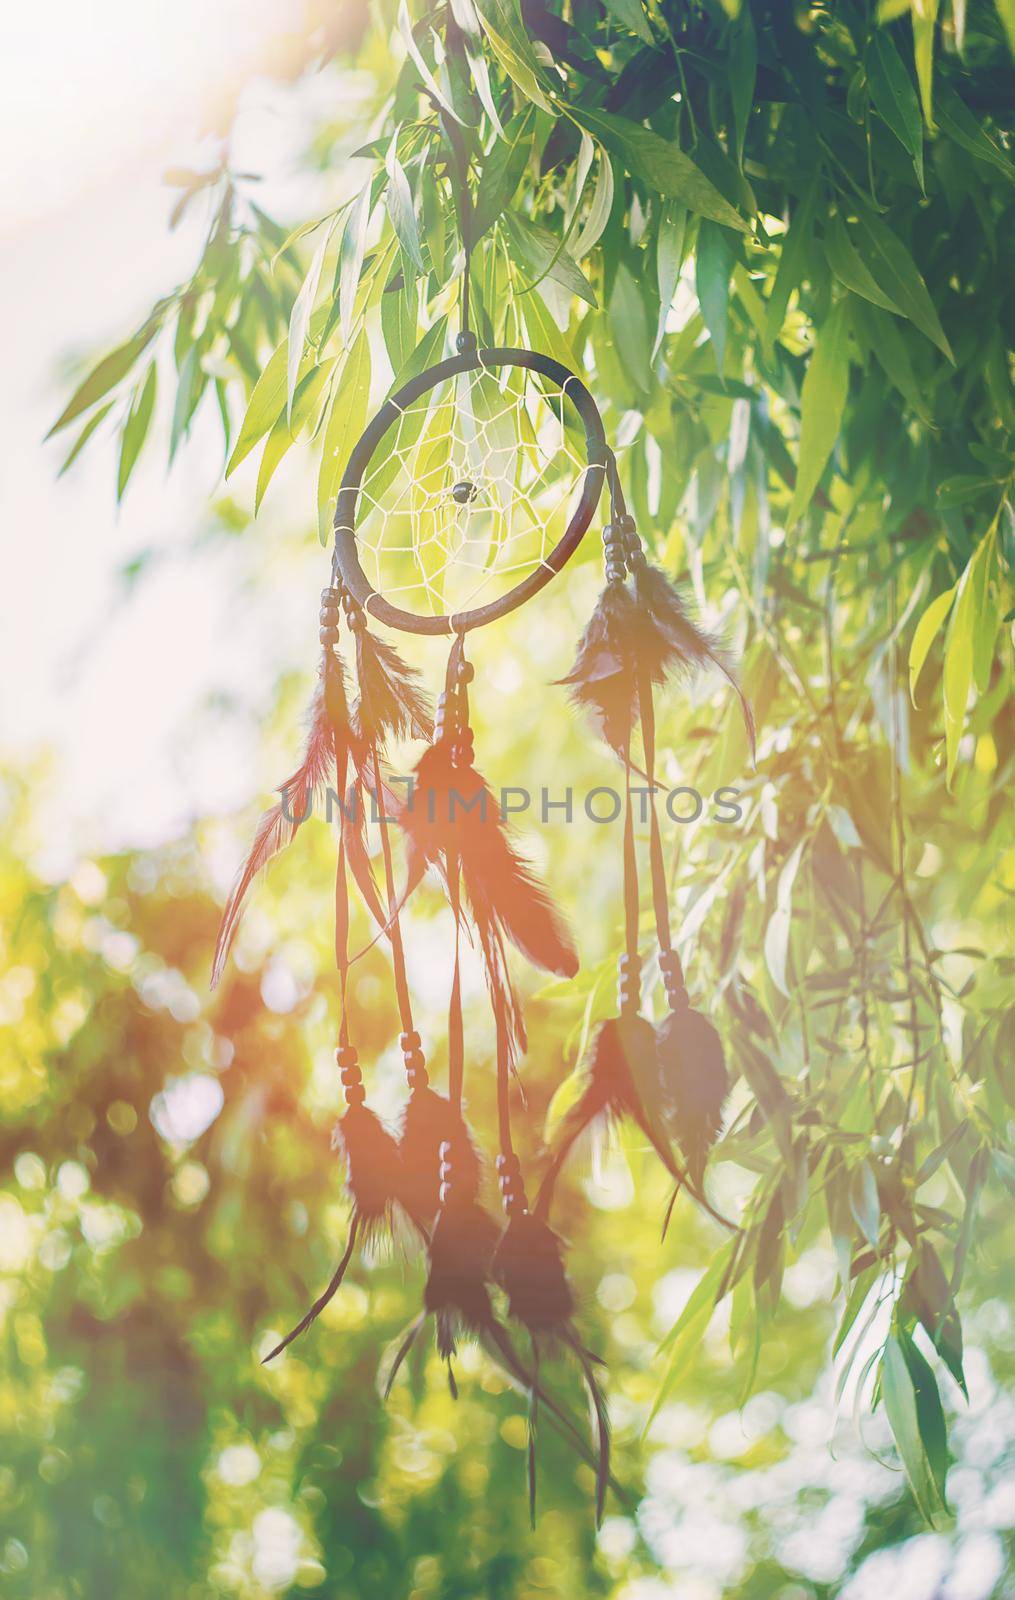 Dream catcher in a vintage style. Selective focus.